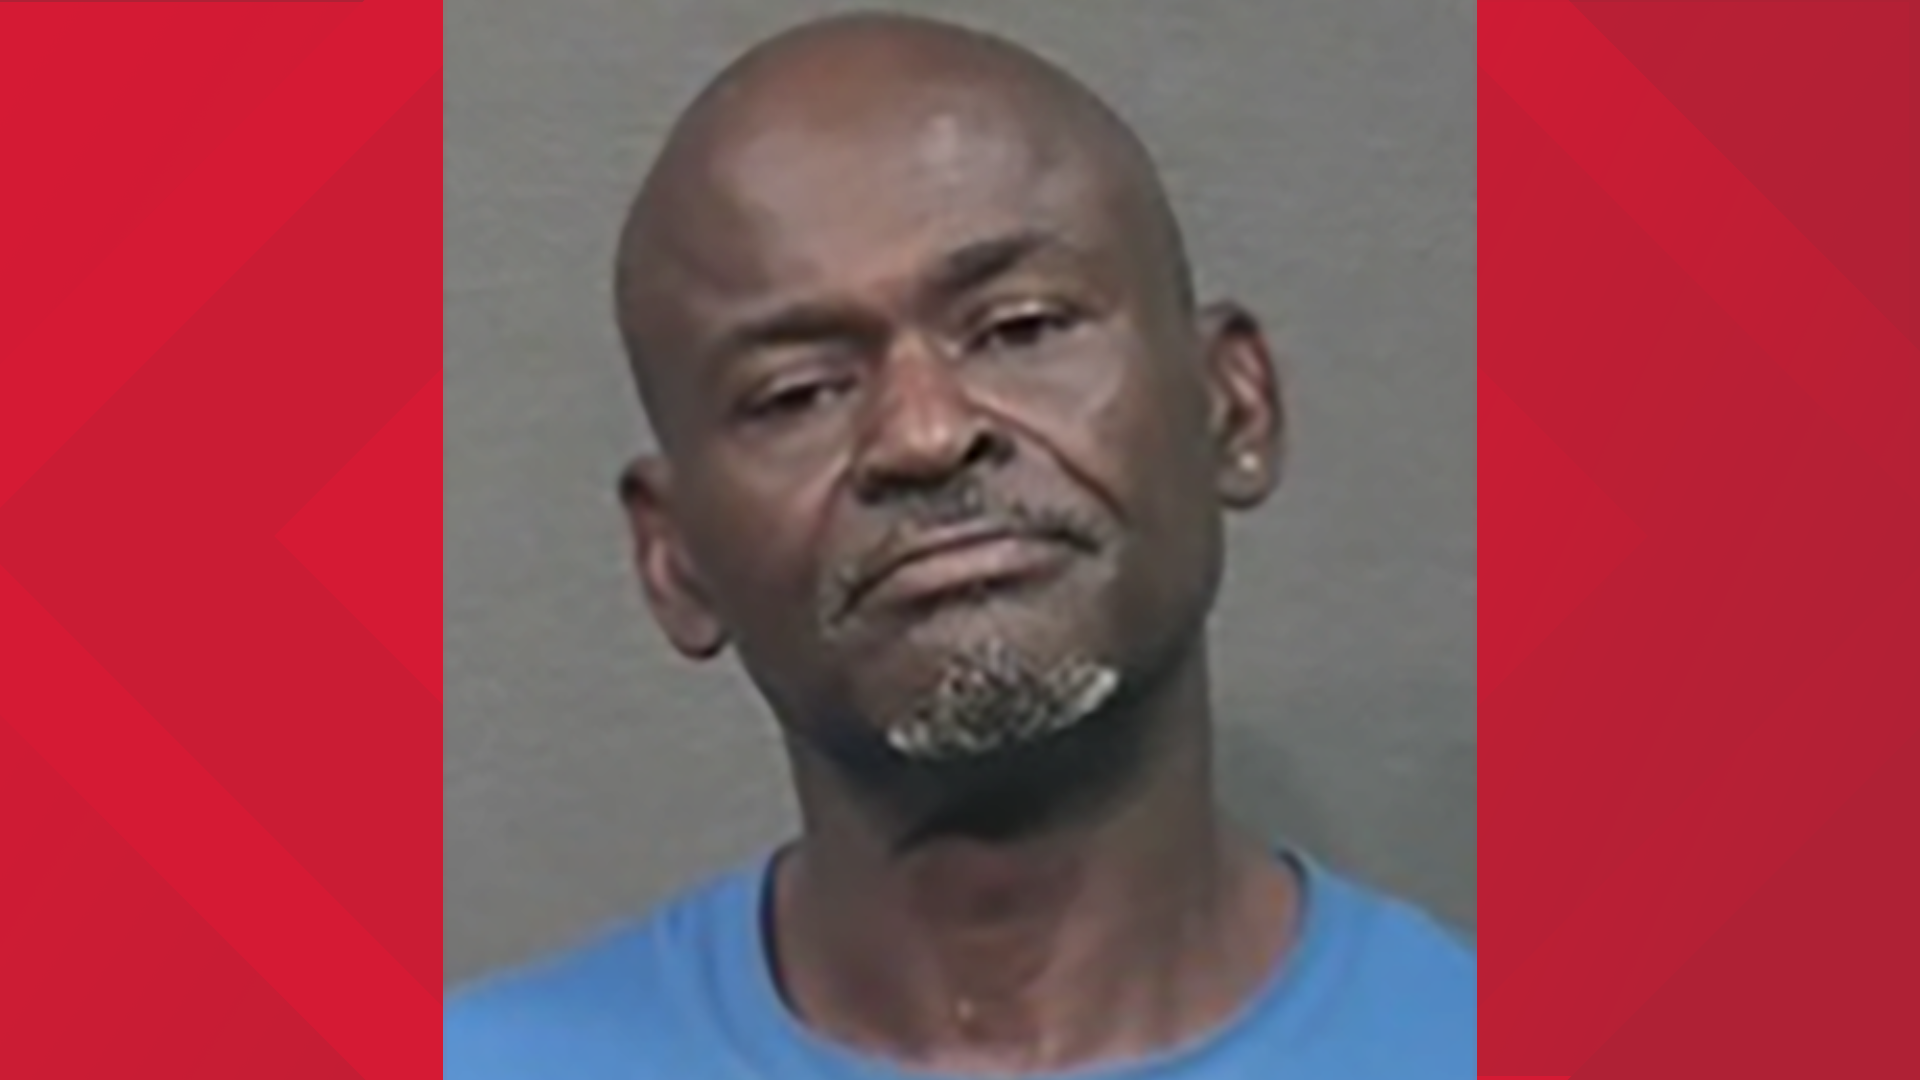 56-year-old John Grant is wanted by Houston police. He's accused of tying up Clifton Barber, causing injuries that led to his death.